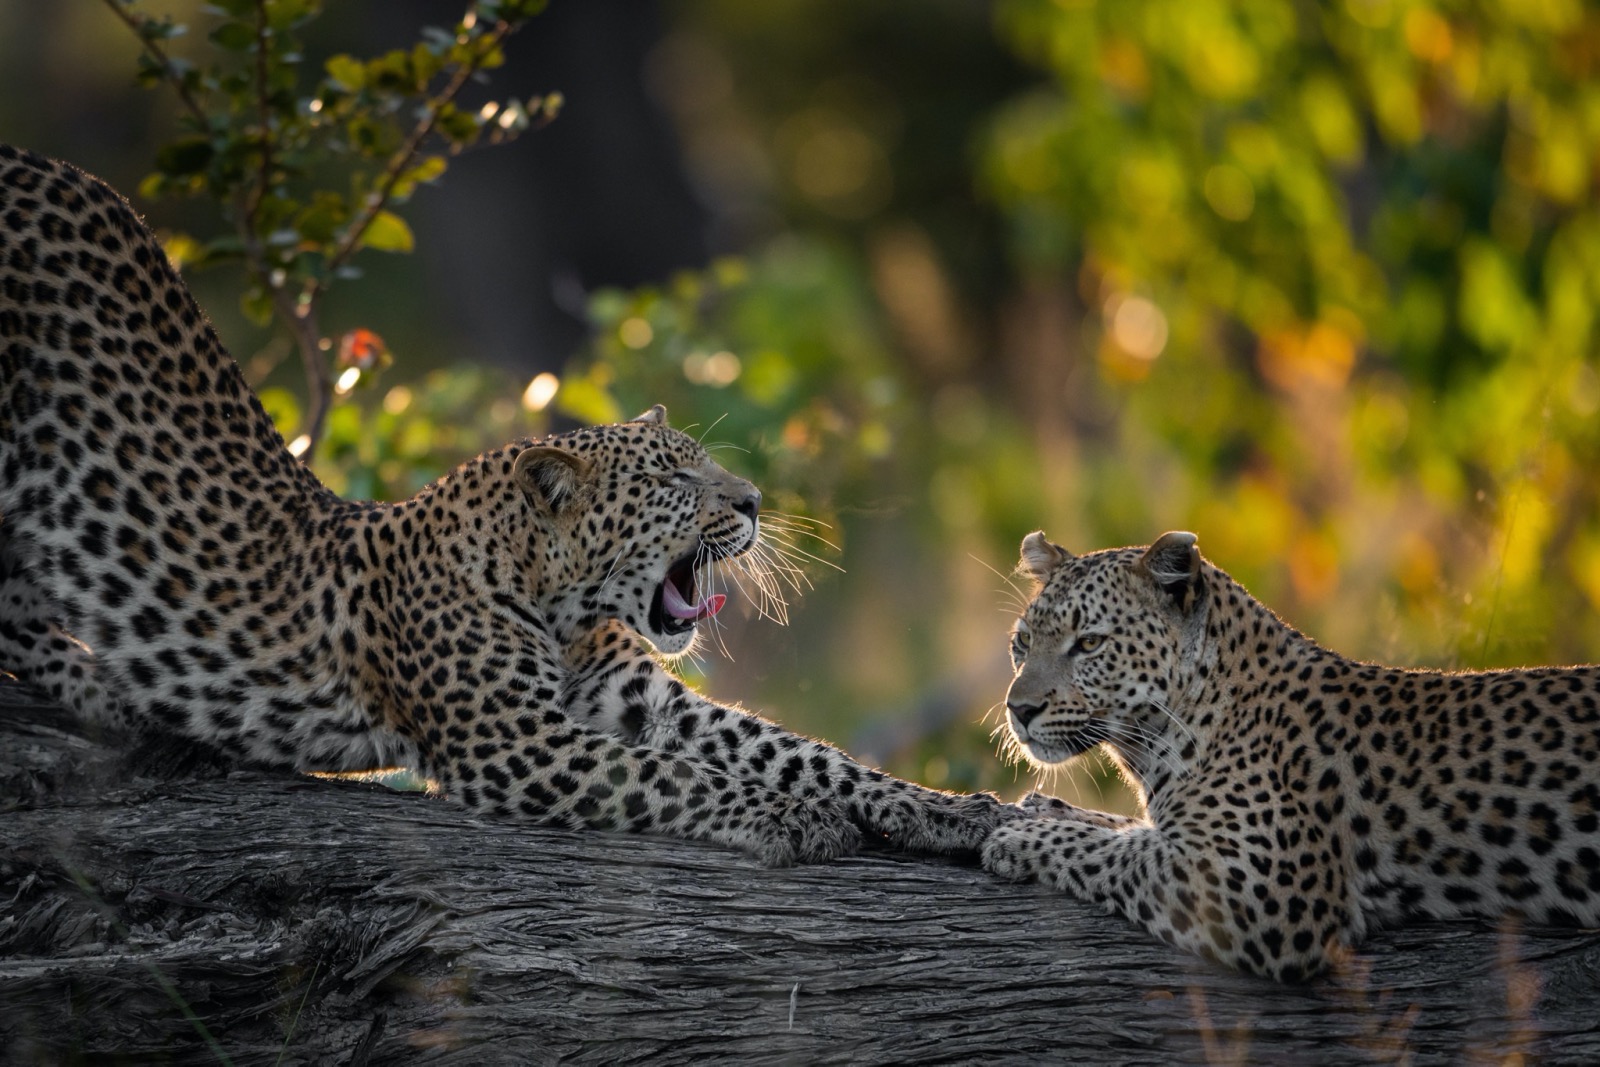 Two leopards relax on a fallen tree trunk in Botswana with the sun creating a backlit effect